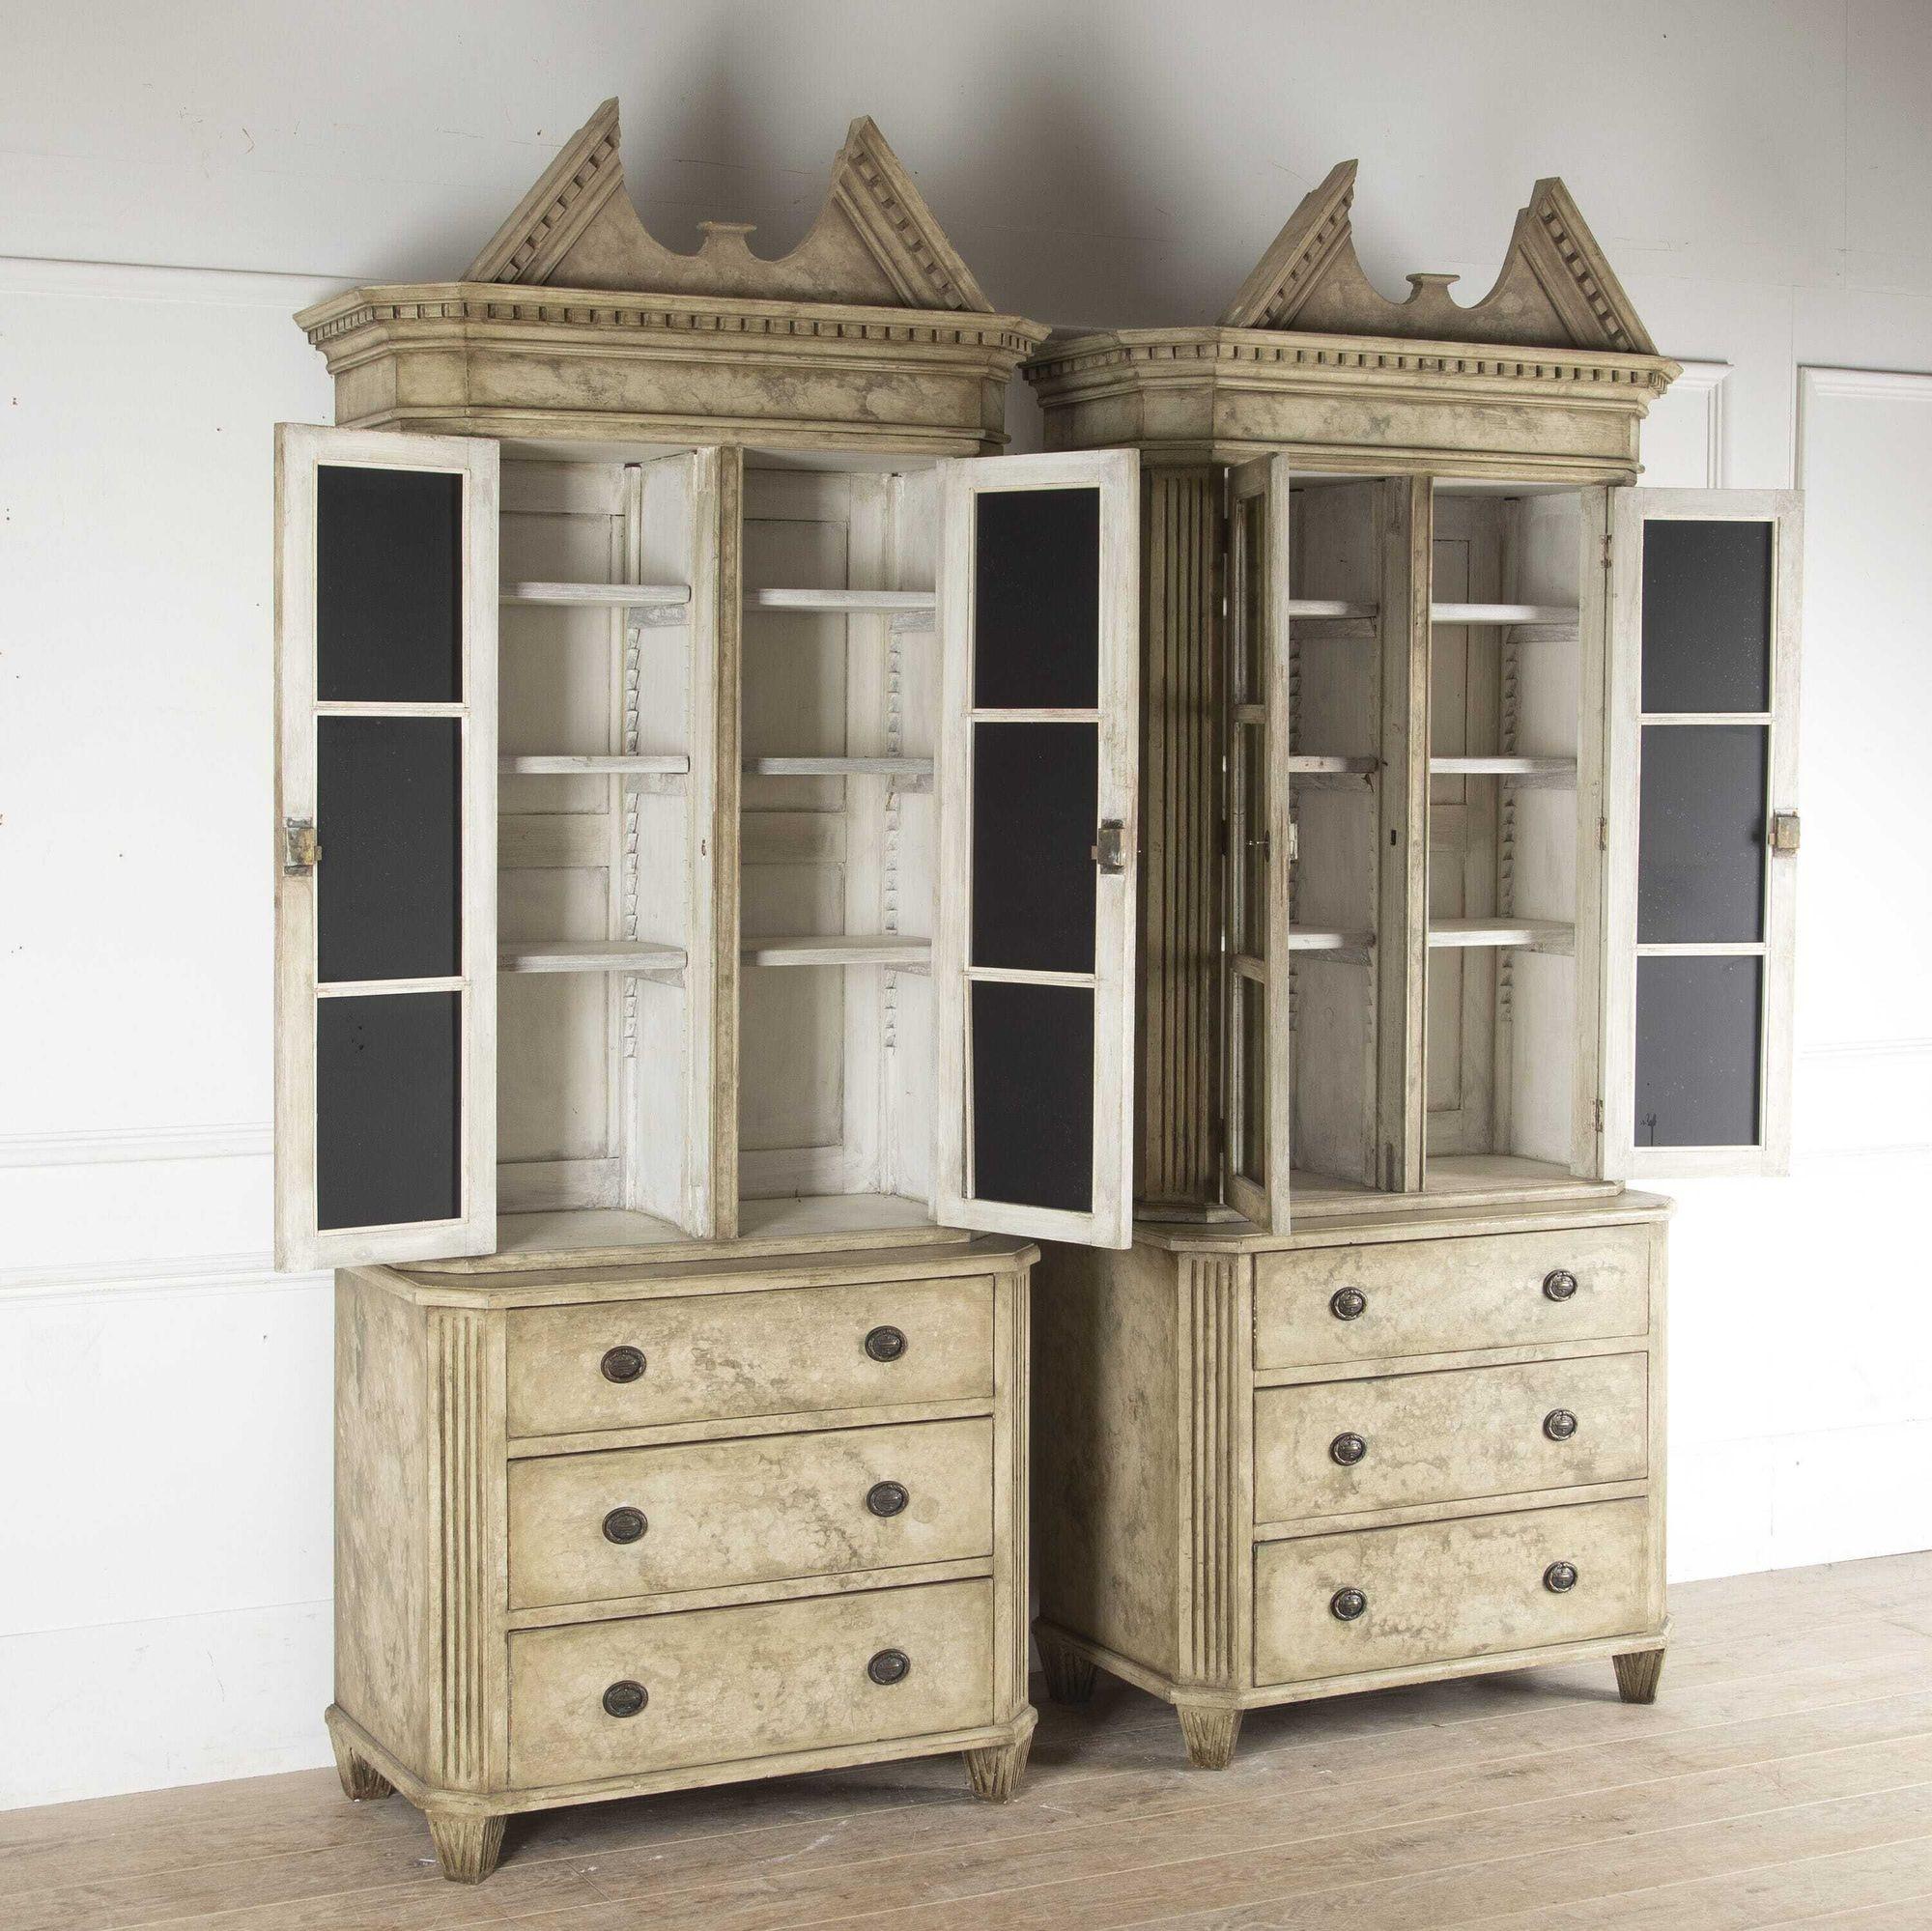 Pair of Swedish broken pediment bookcases, in painted pine. 
Although these bookcases embody the Gustavian style, they were made in the 1950s to adorn the library of a Swedish castle and match a similar antique pair. 
The top half of each is